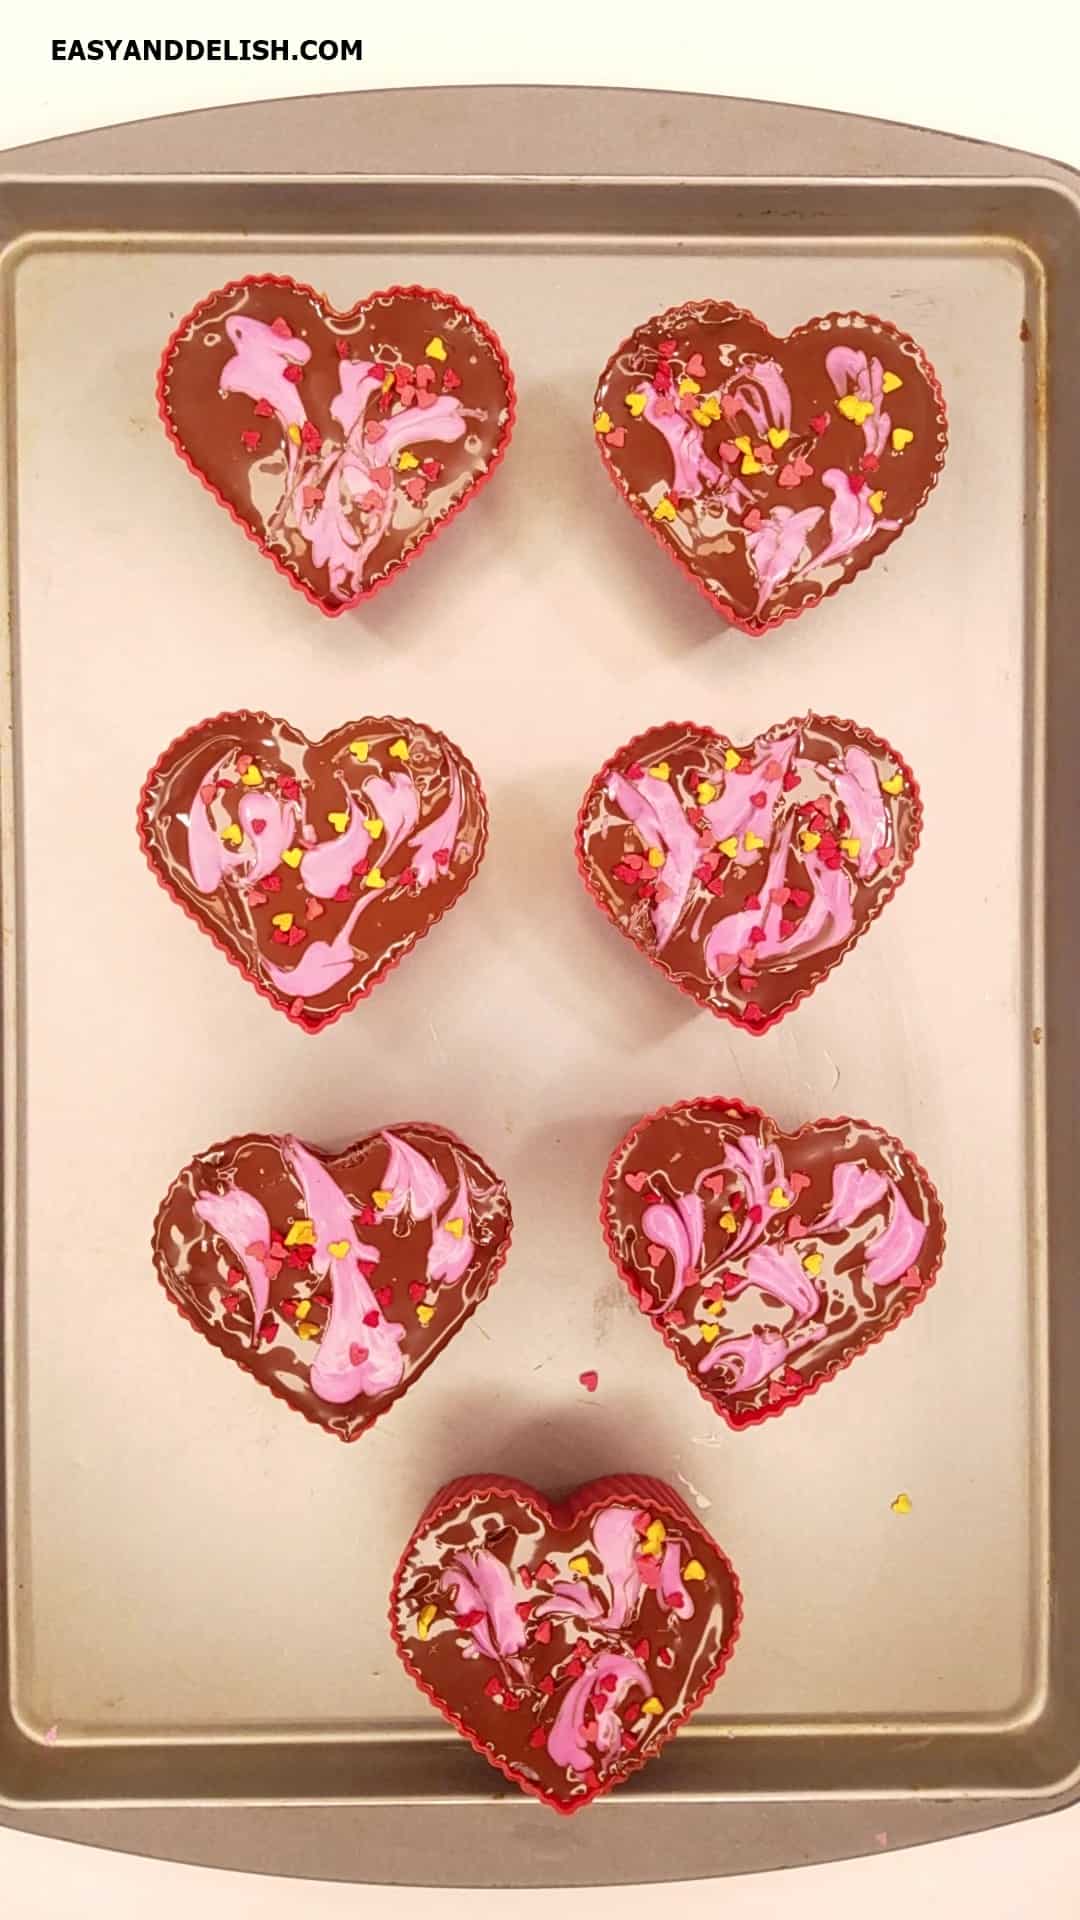 Last layer spponed into the molds and decorated for Valentine's Day!